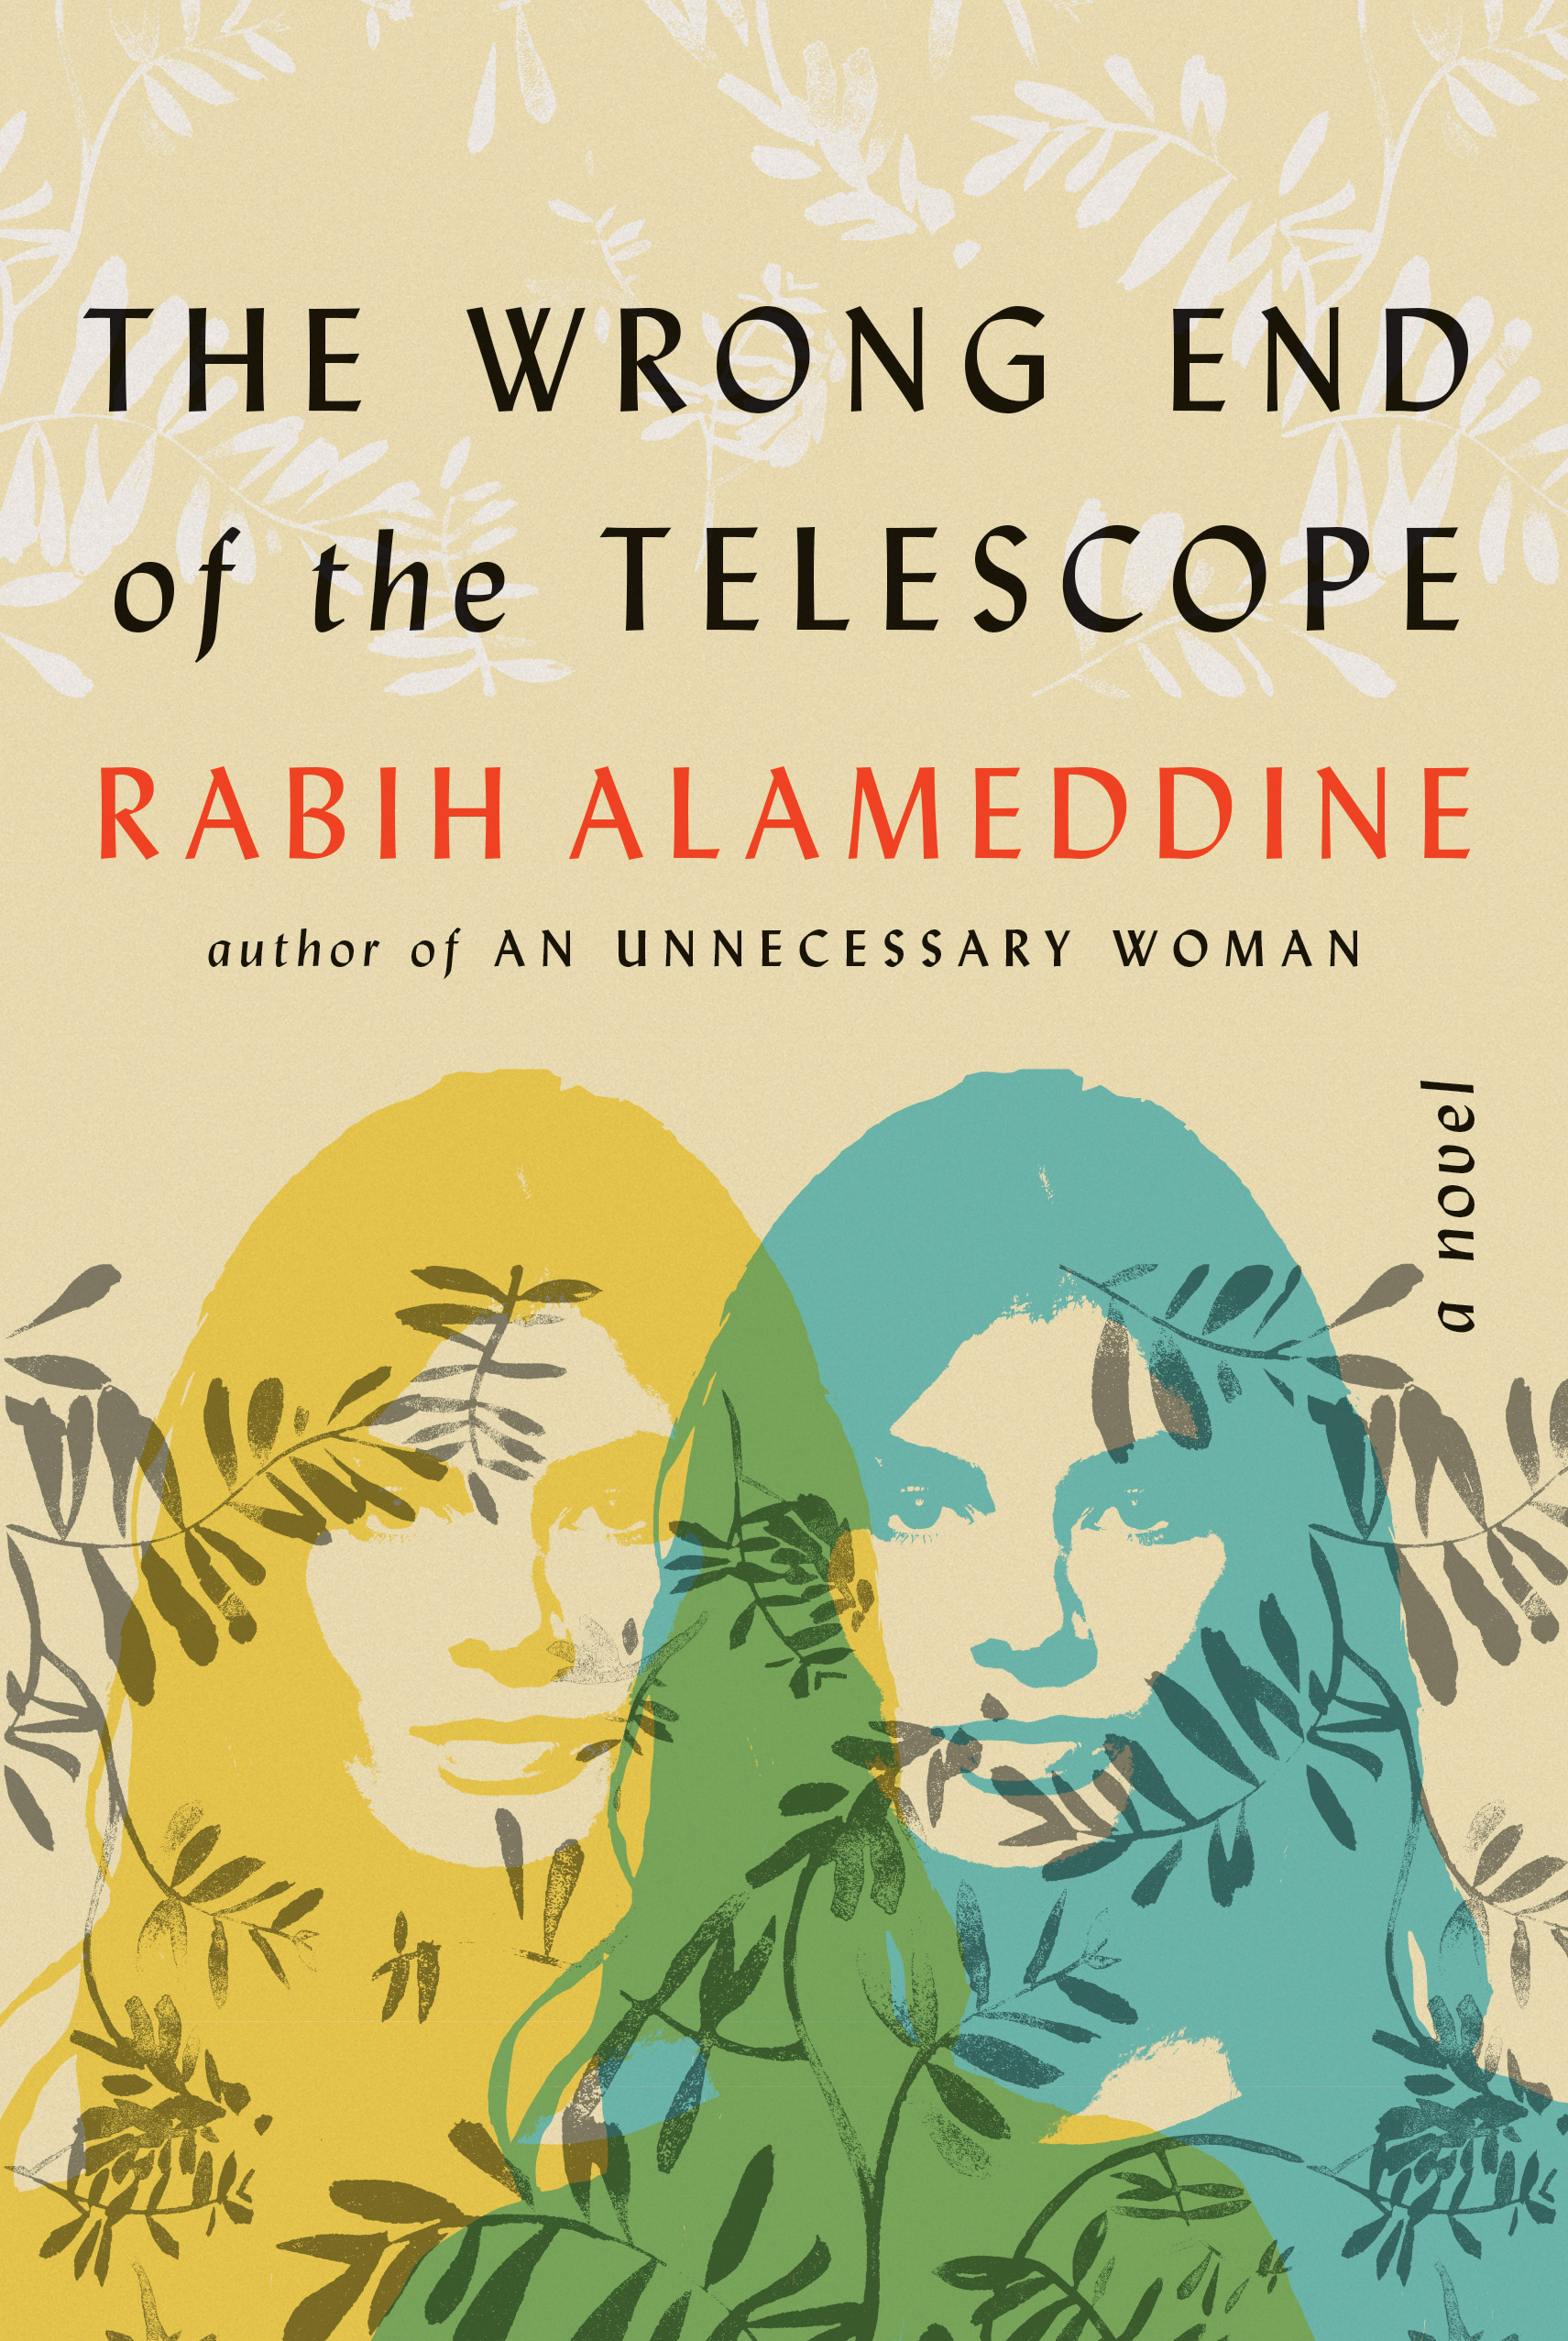 The Wrong End of the Telescope book cover